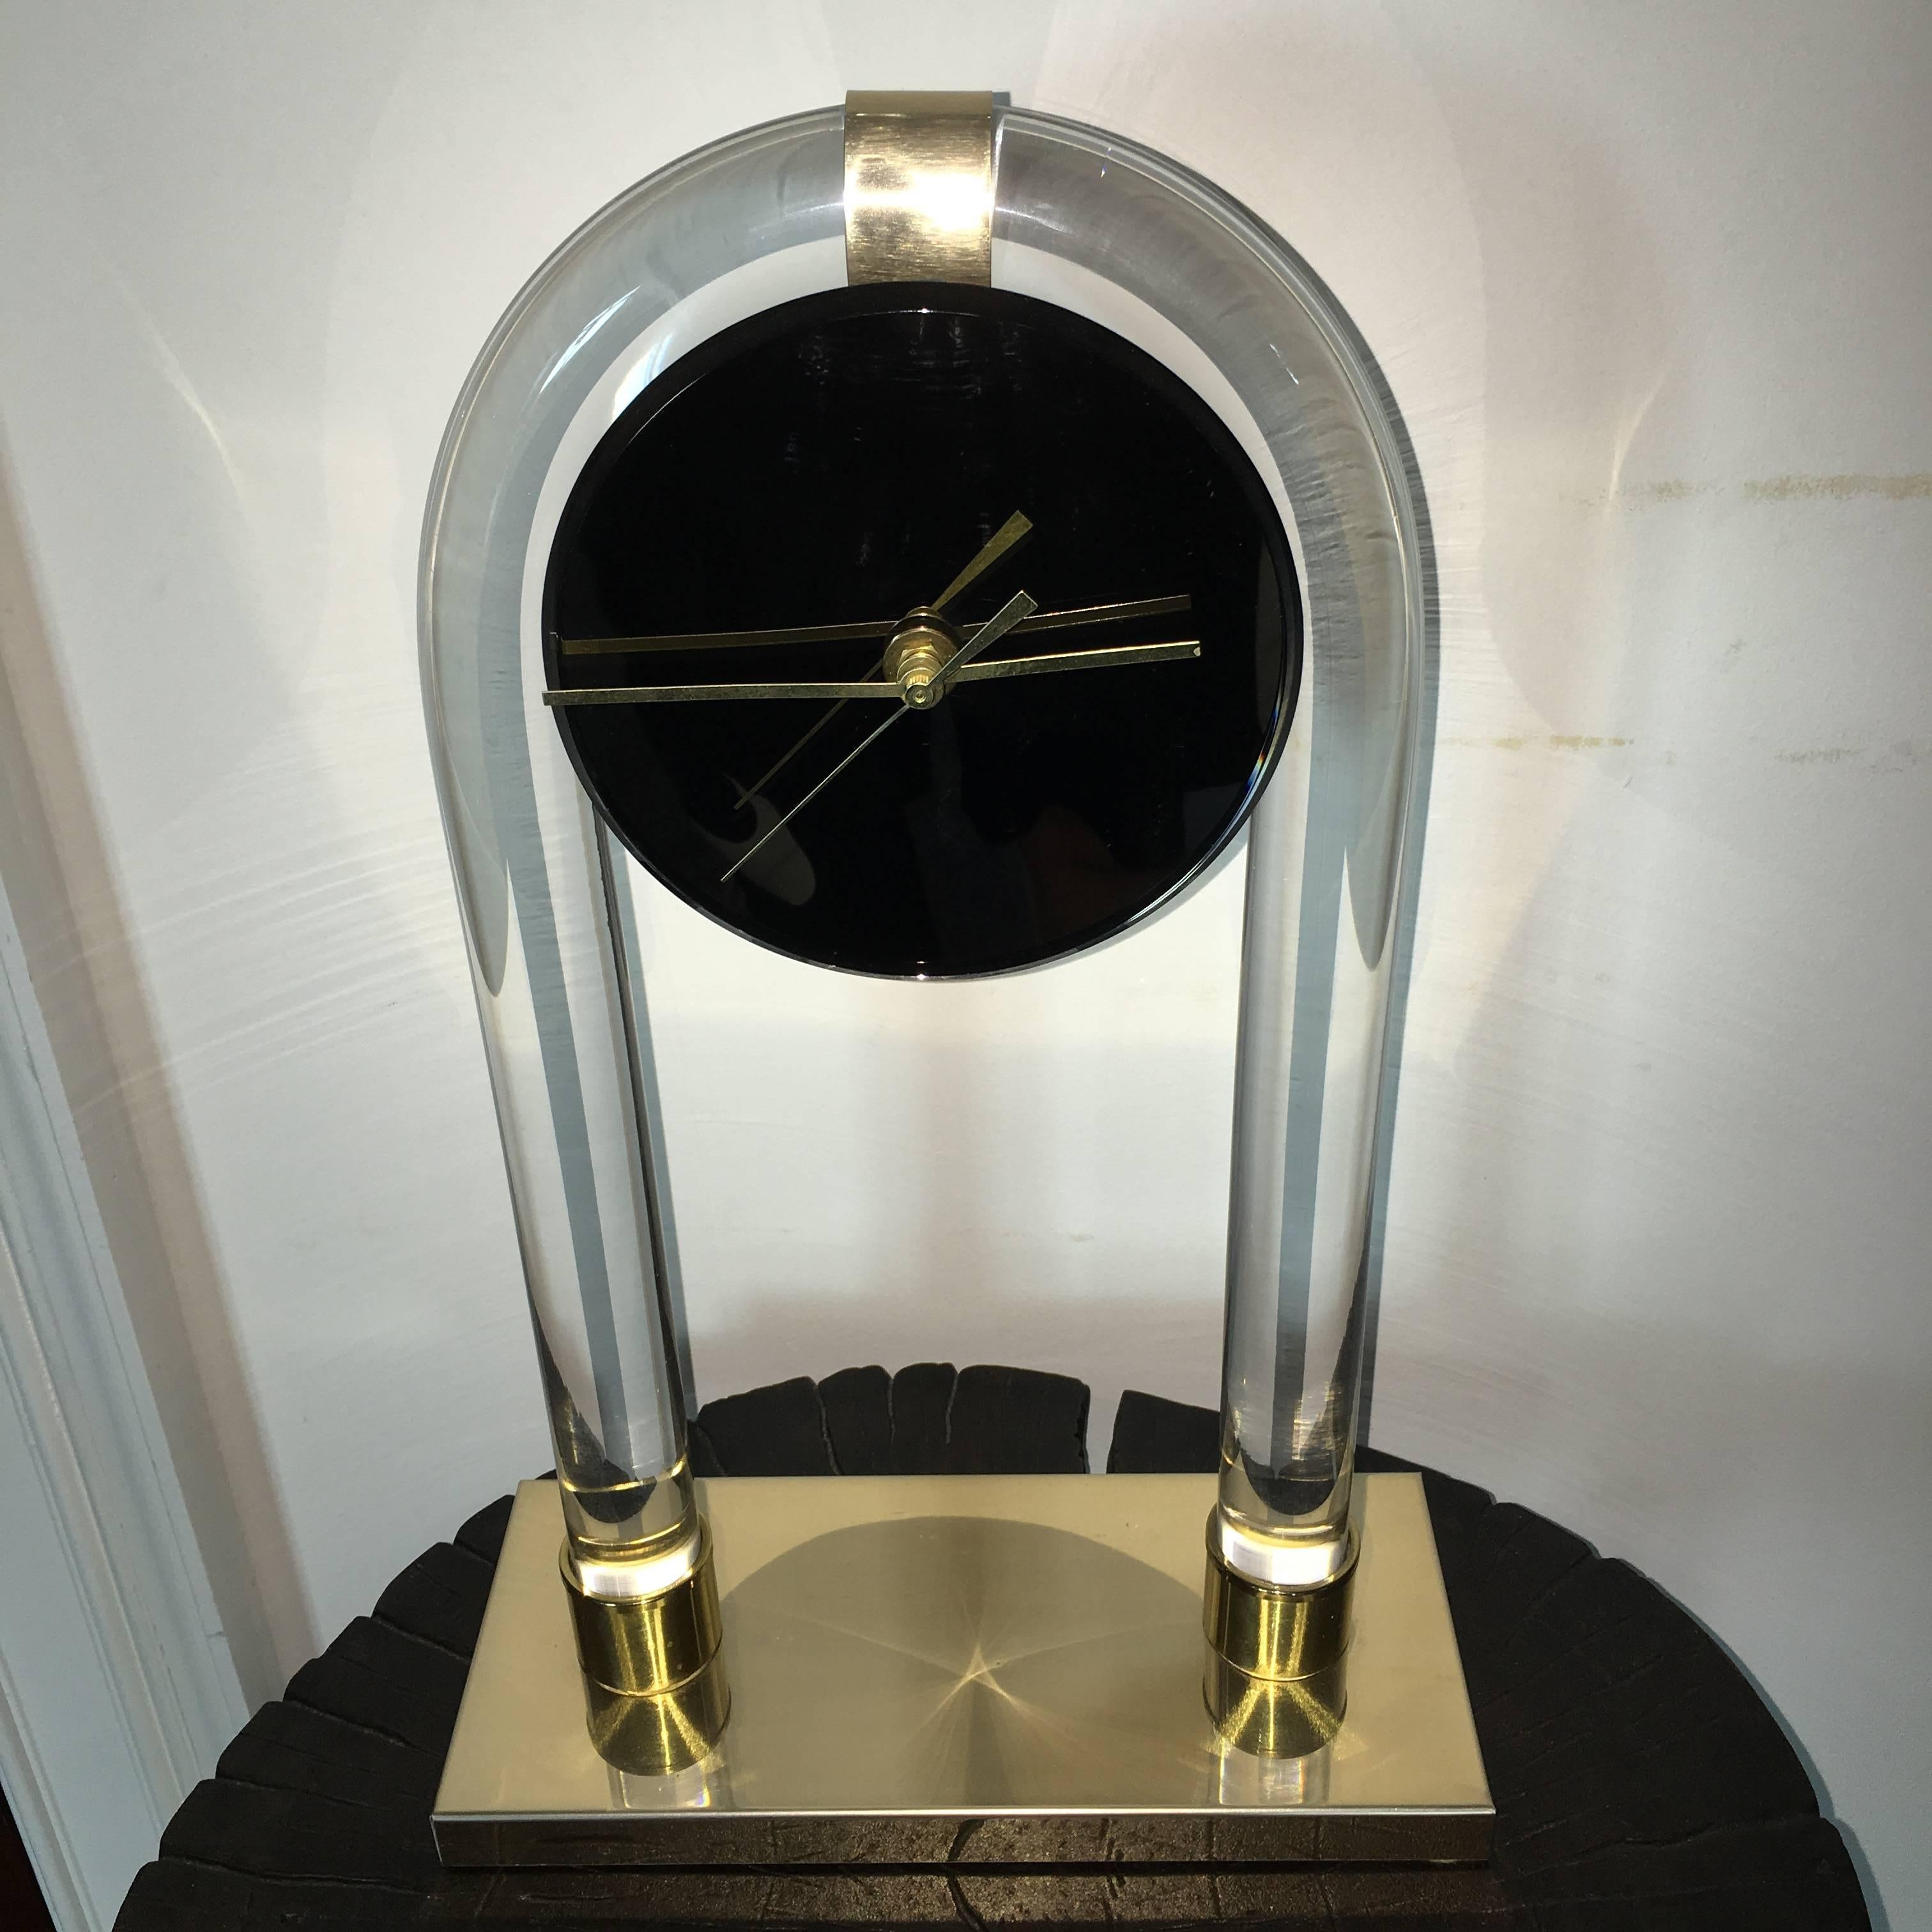 Great vintage sculptural Lucite table clock. This interesting design is comprised of thick tubed Lucite with mirrored face and brass accents. Quartz mechanism works smooth.